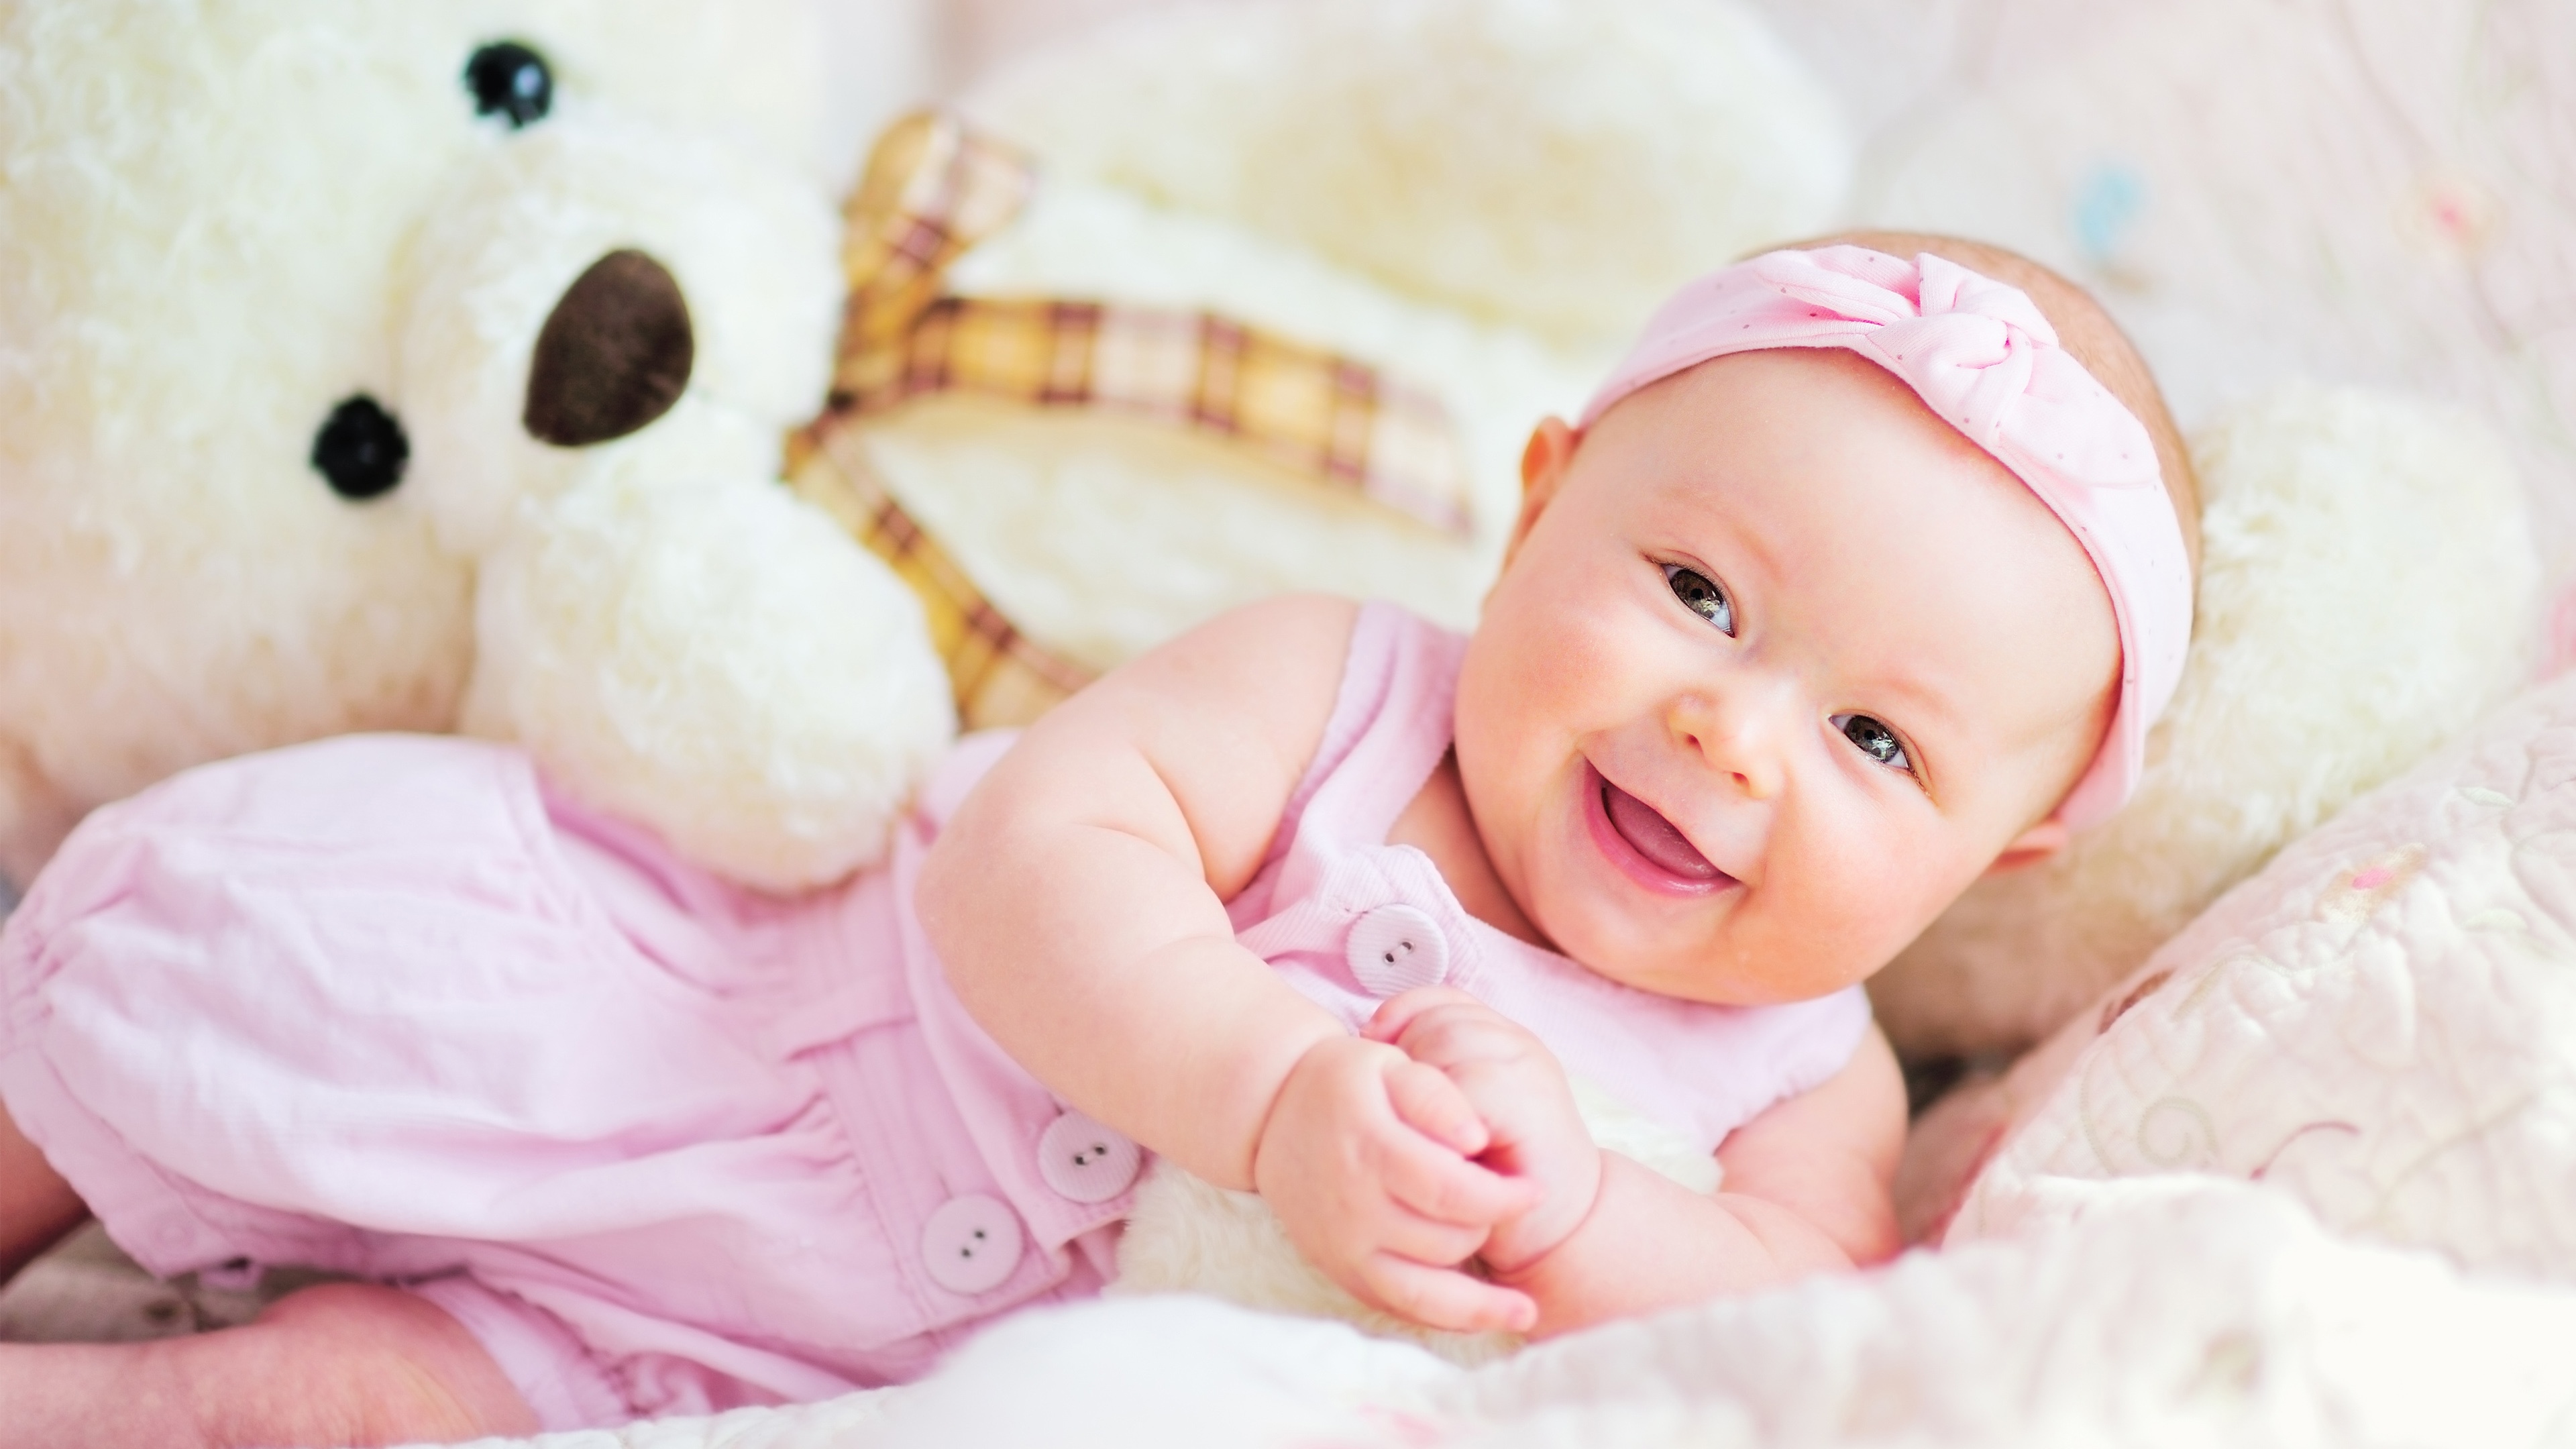 Cute Baby Teddy Bear Wallpapers in jpg format for free download